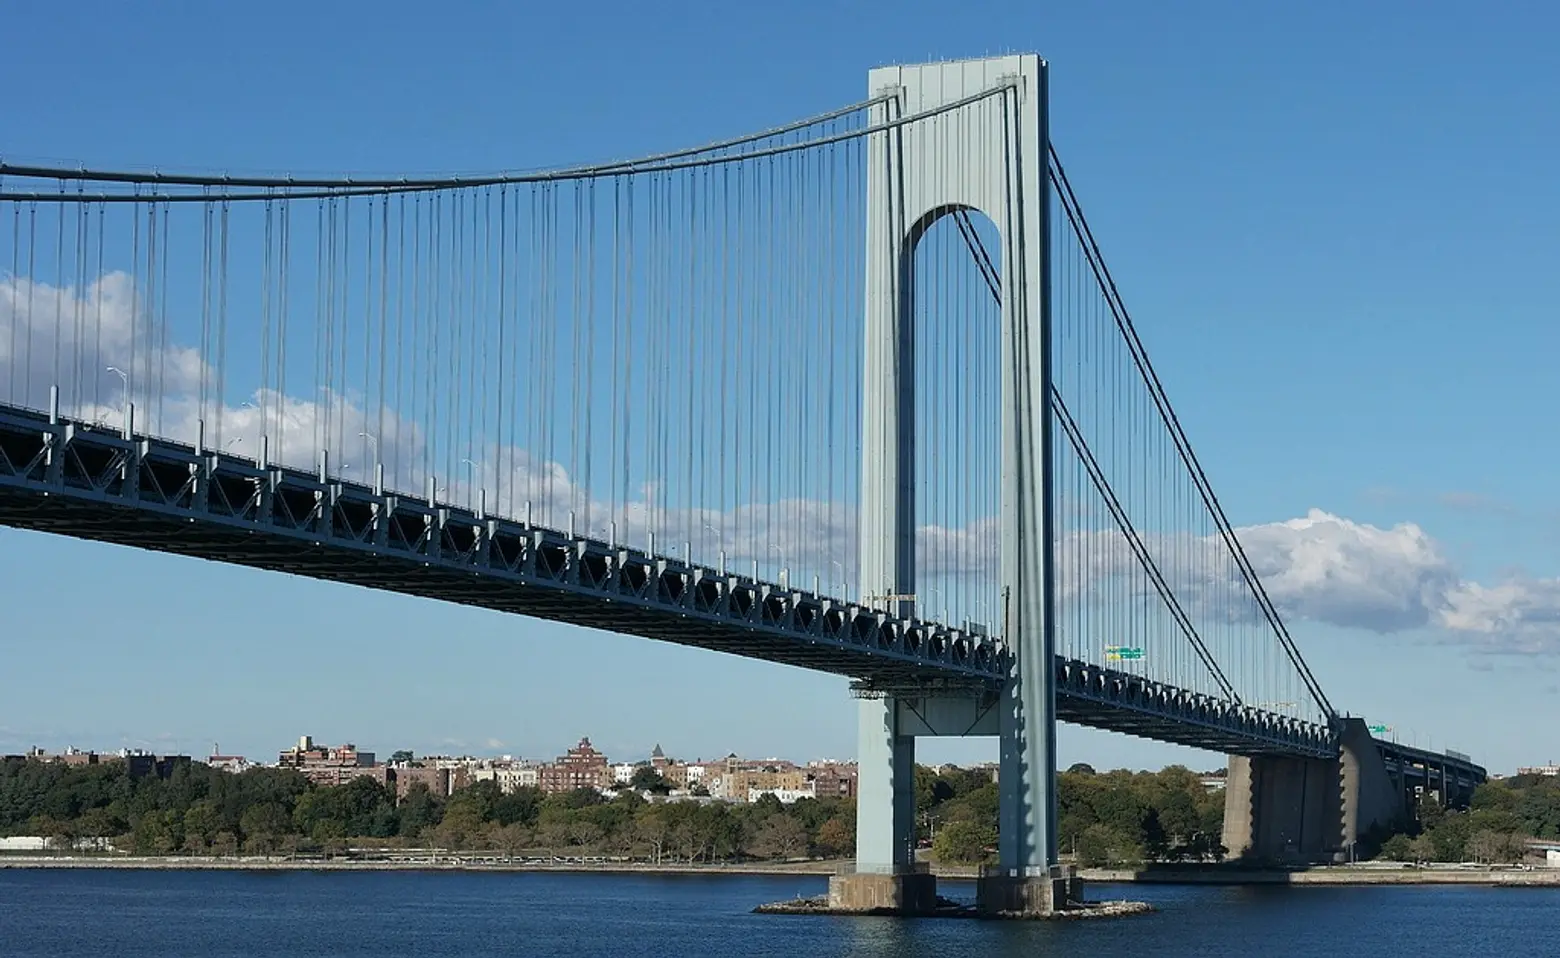 The Verrazano Bridge Opened 50 Years Ago, but There’s Still a Myth About Its Toll